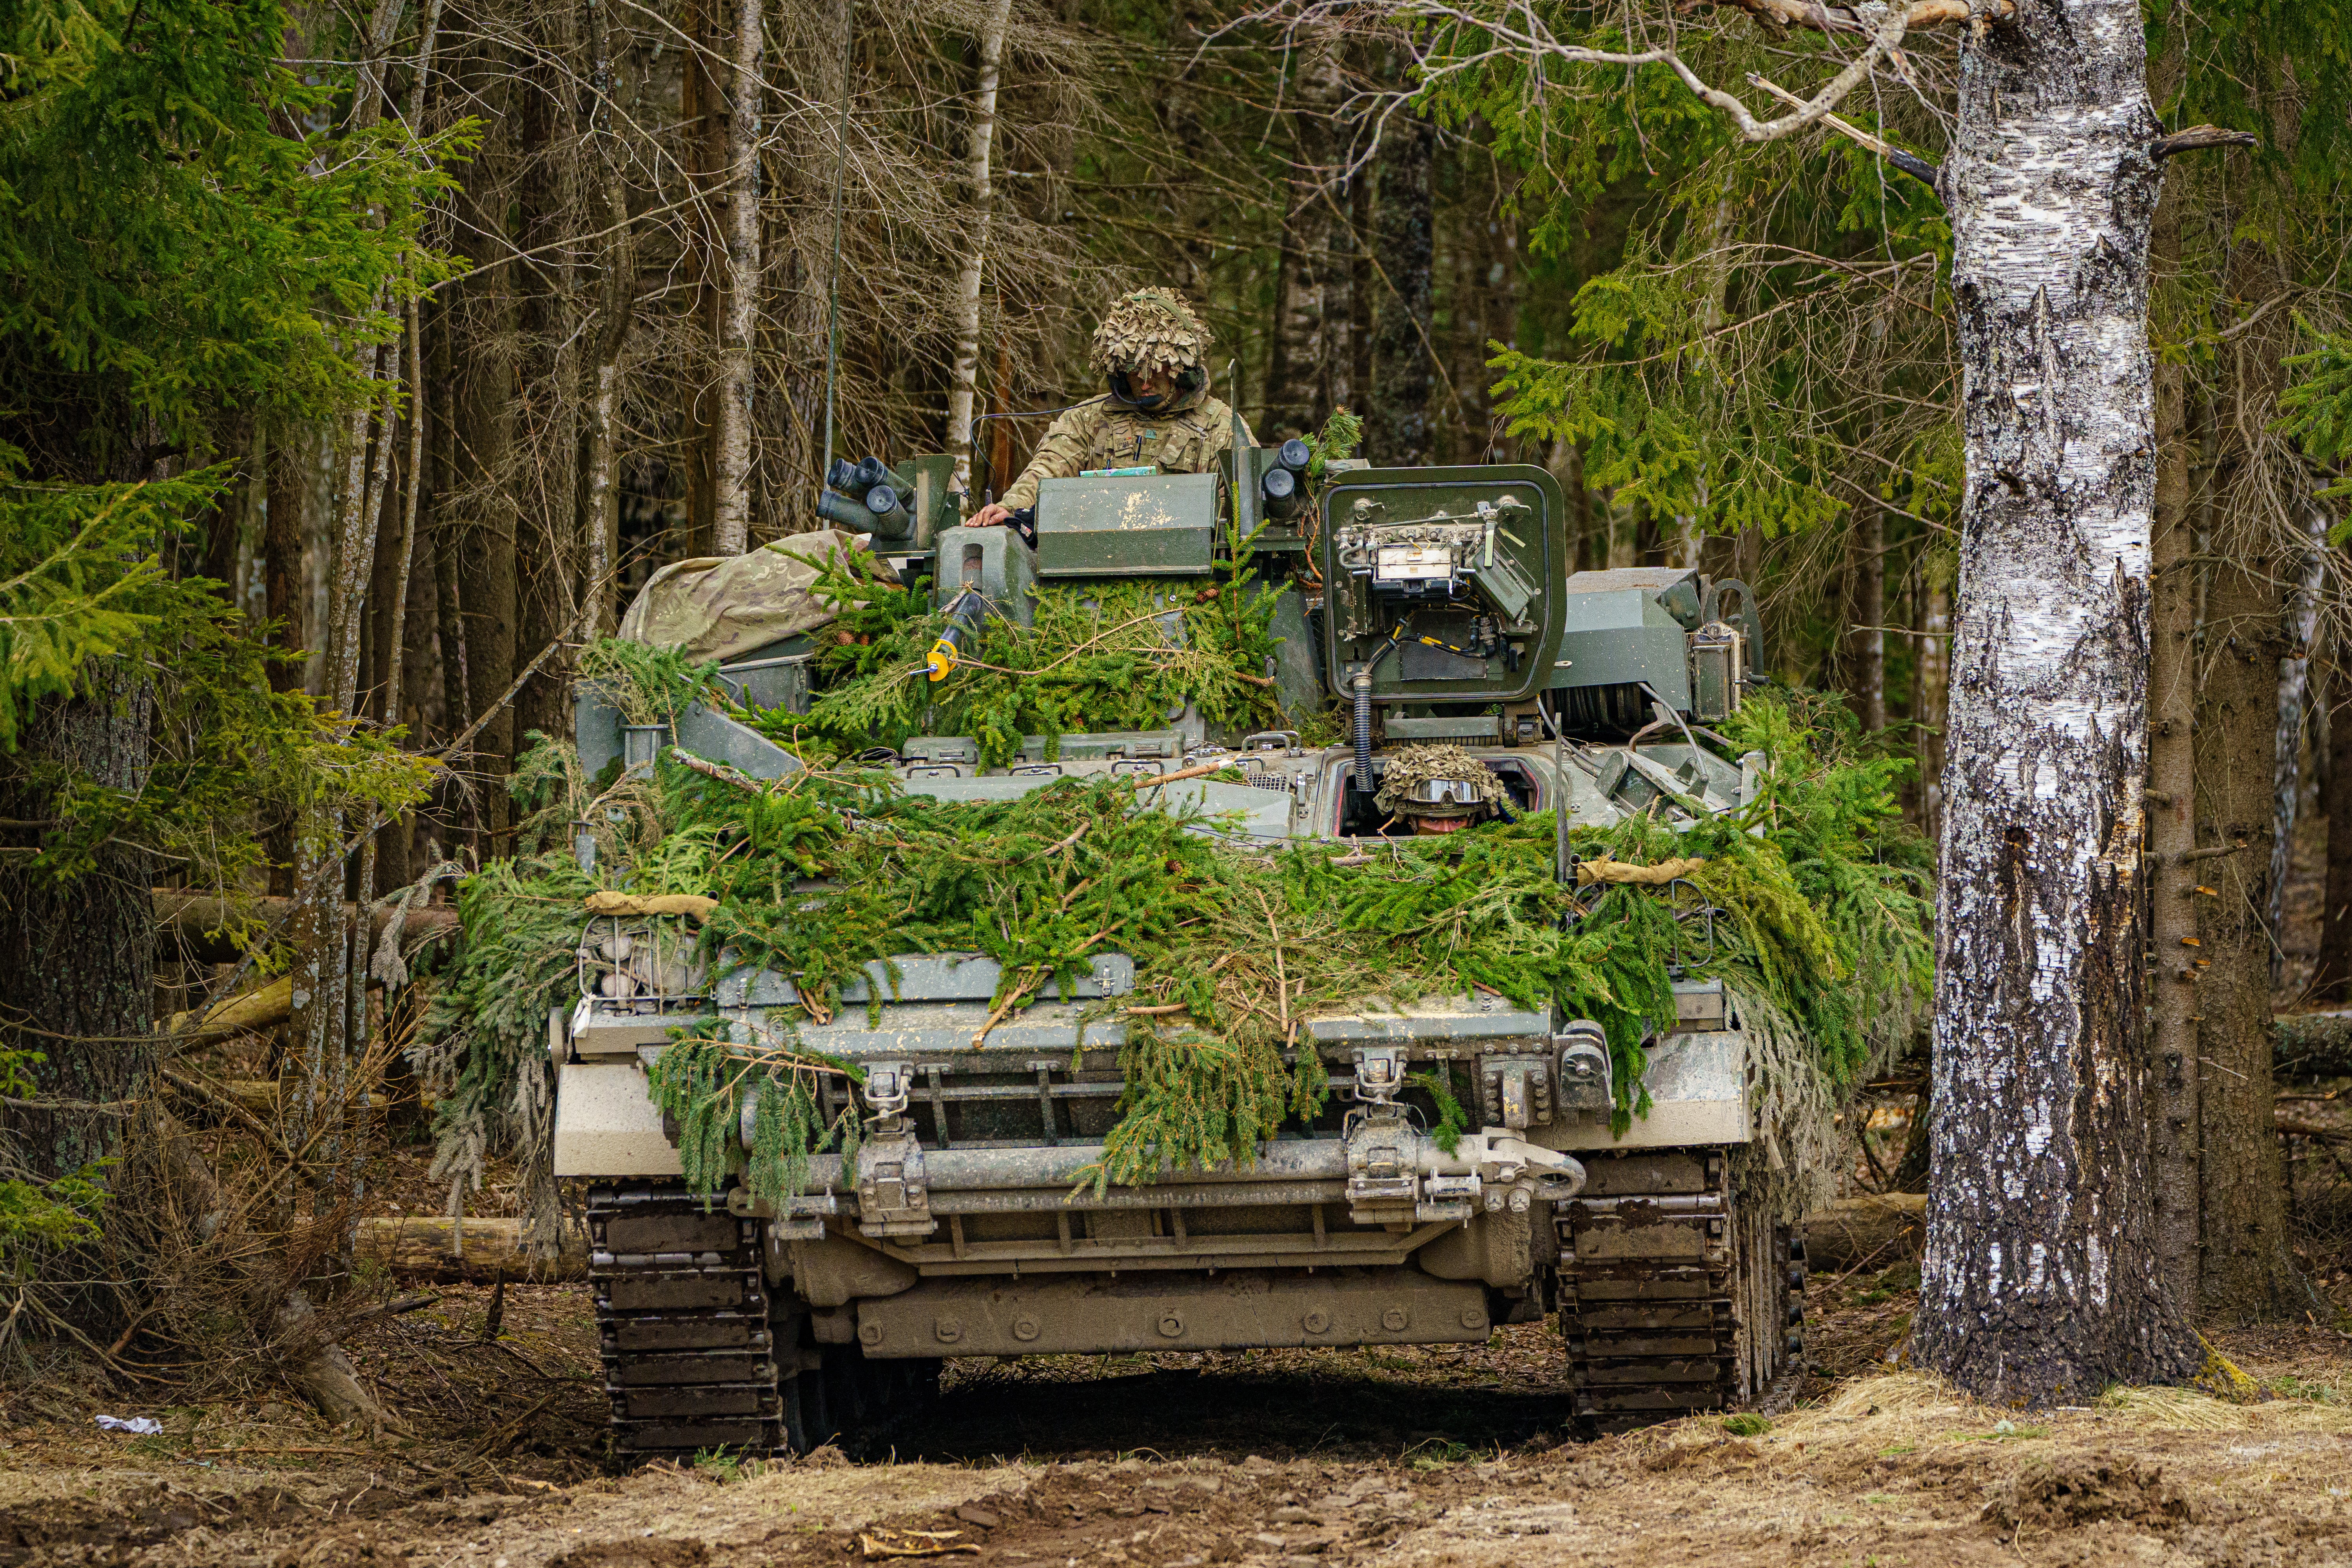 British soldiers on manoeuvres in the Tapa central military training area in Estonia during a Nato exercise (PA)